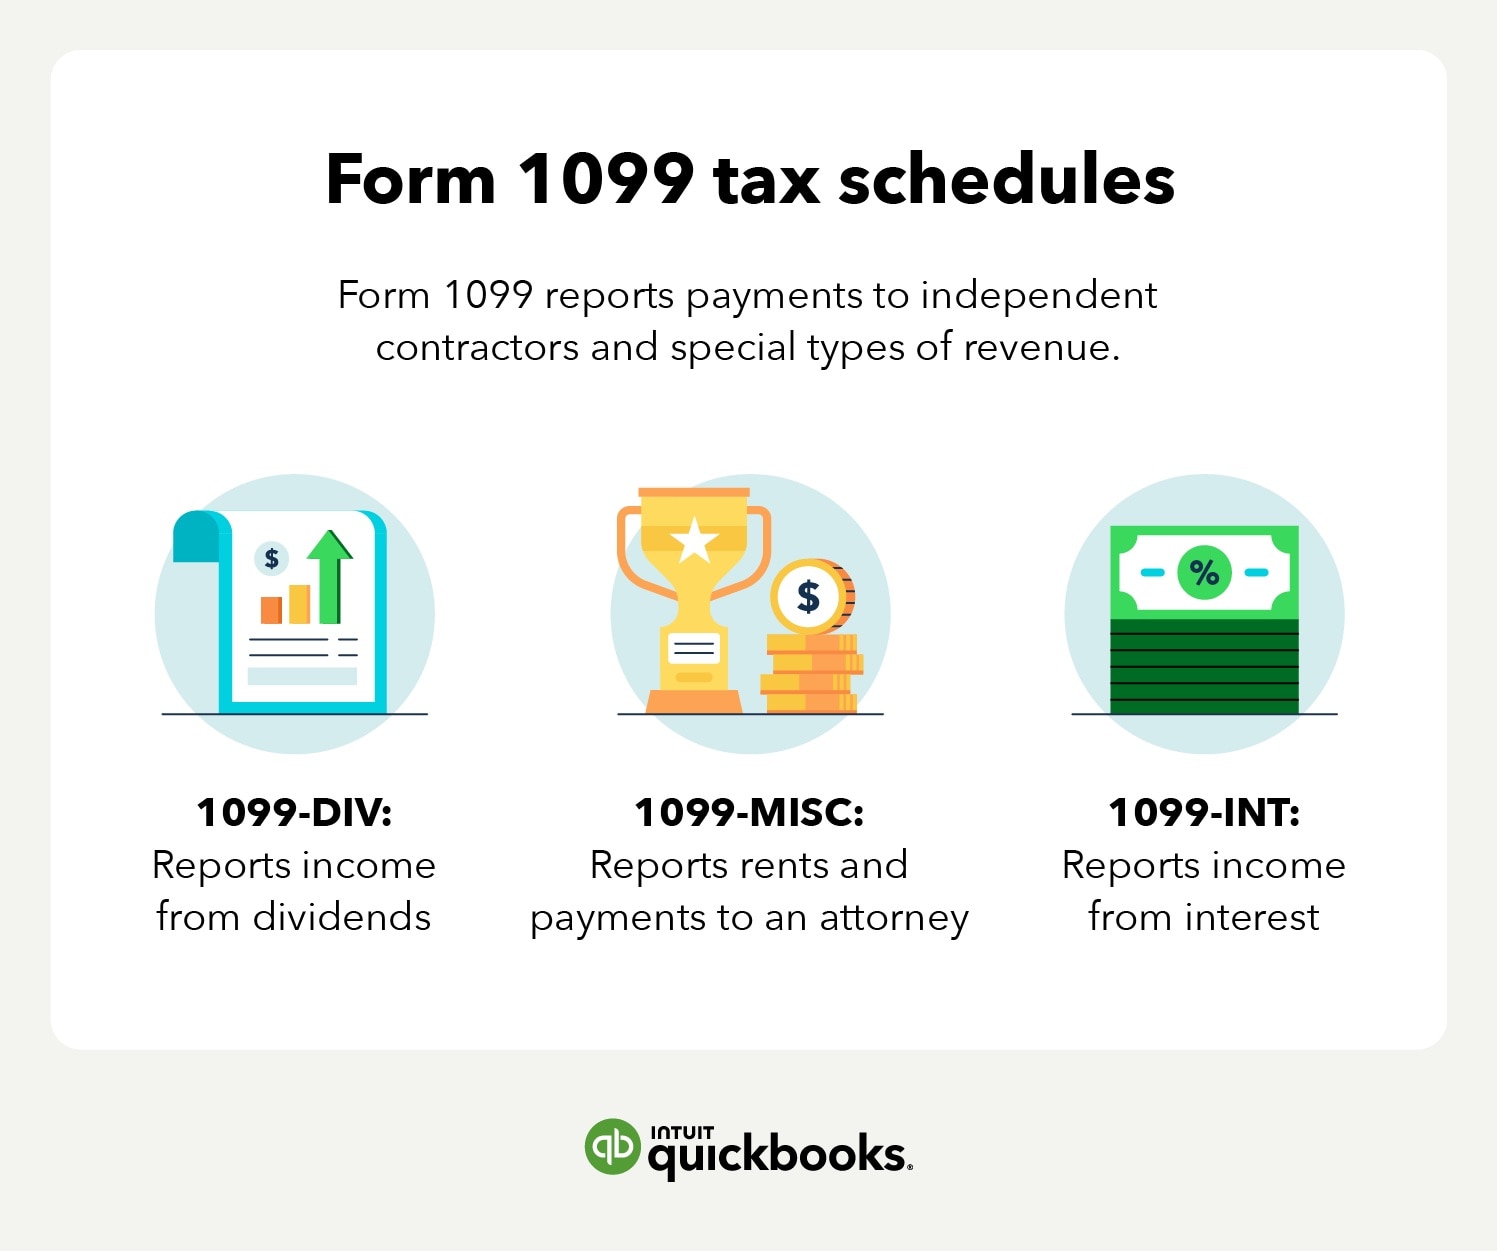 Alt text: Form 1099 tax schedules: Form 1099 reports payments to independent contractors and special types of revenue. 1099-DIV: Reports income from dividends. 1099-MISC: reports rents and payments to an attorney. 1099-INT: Reports income from interest.